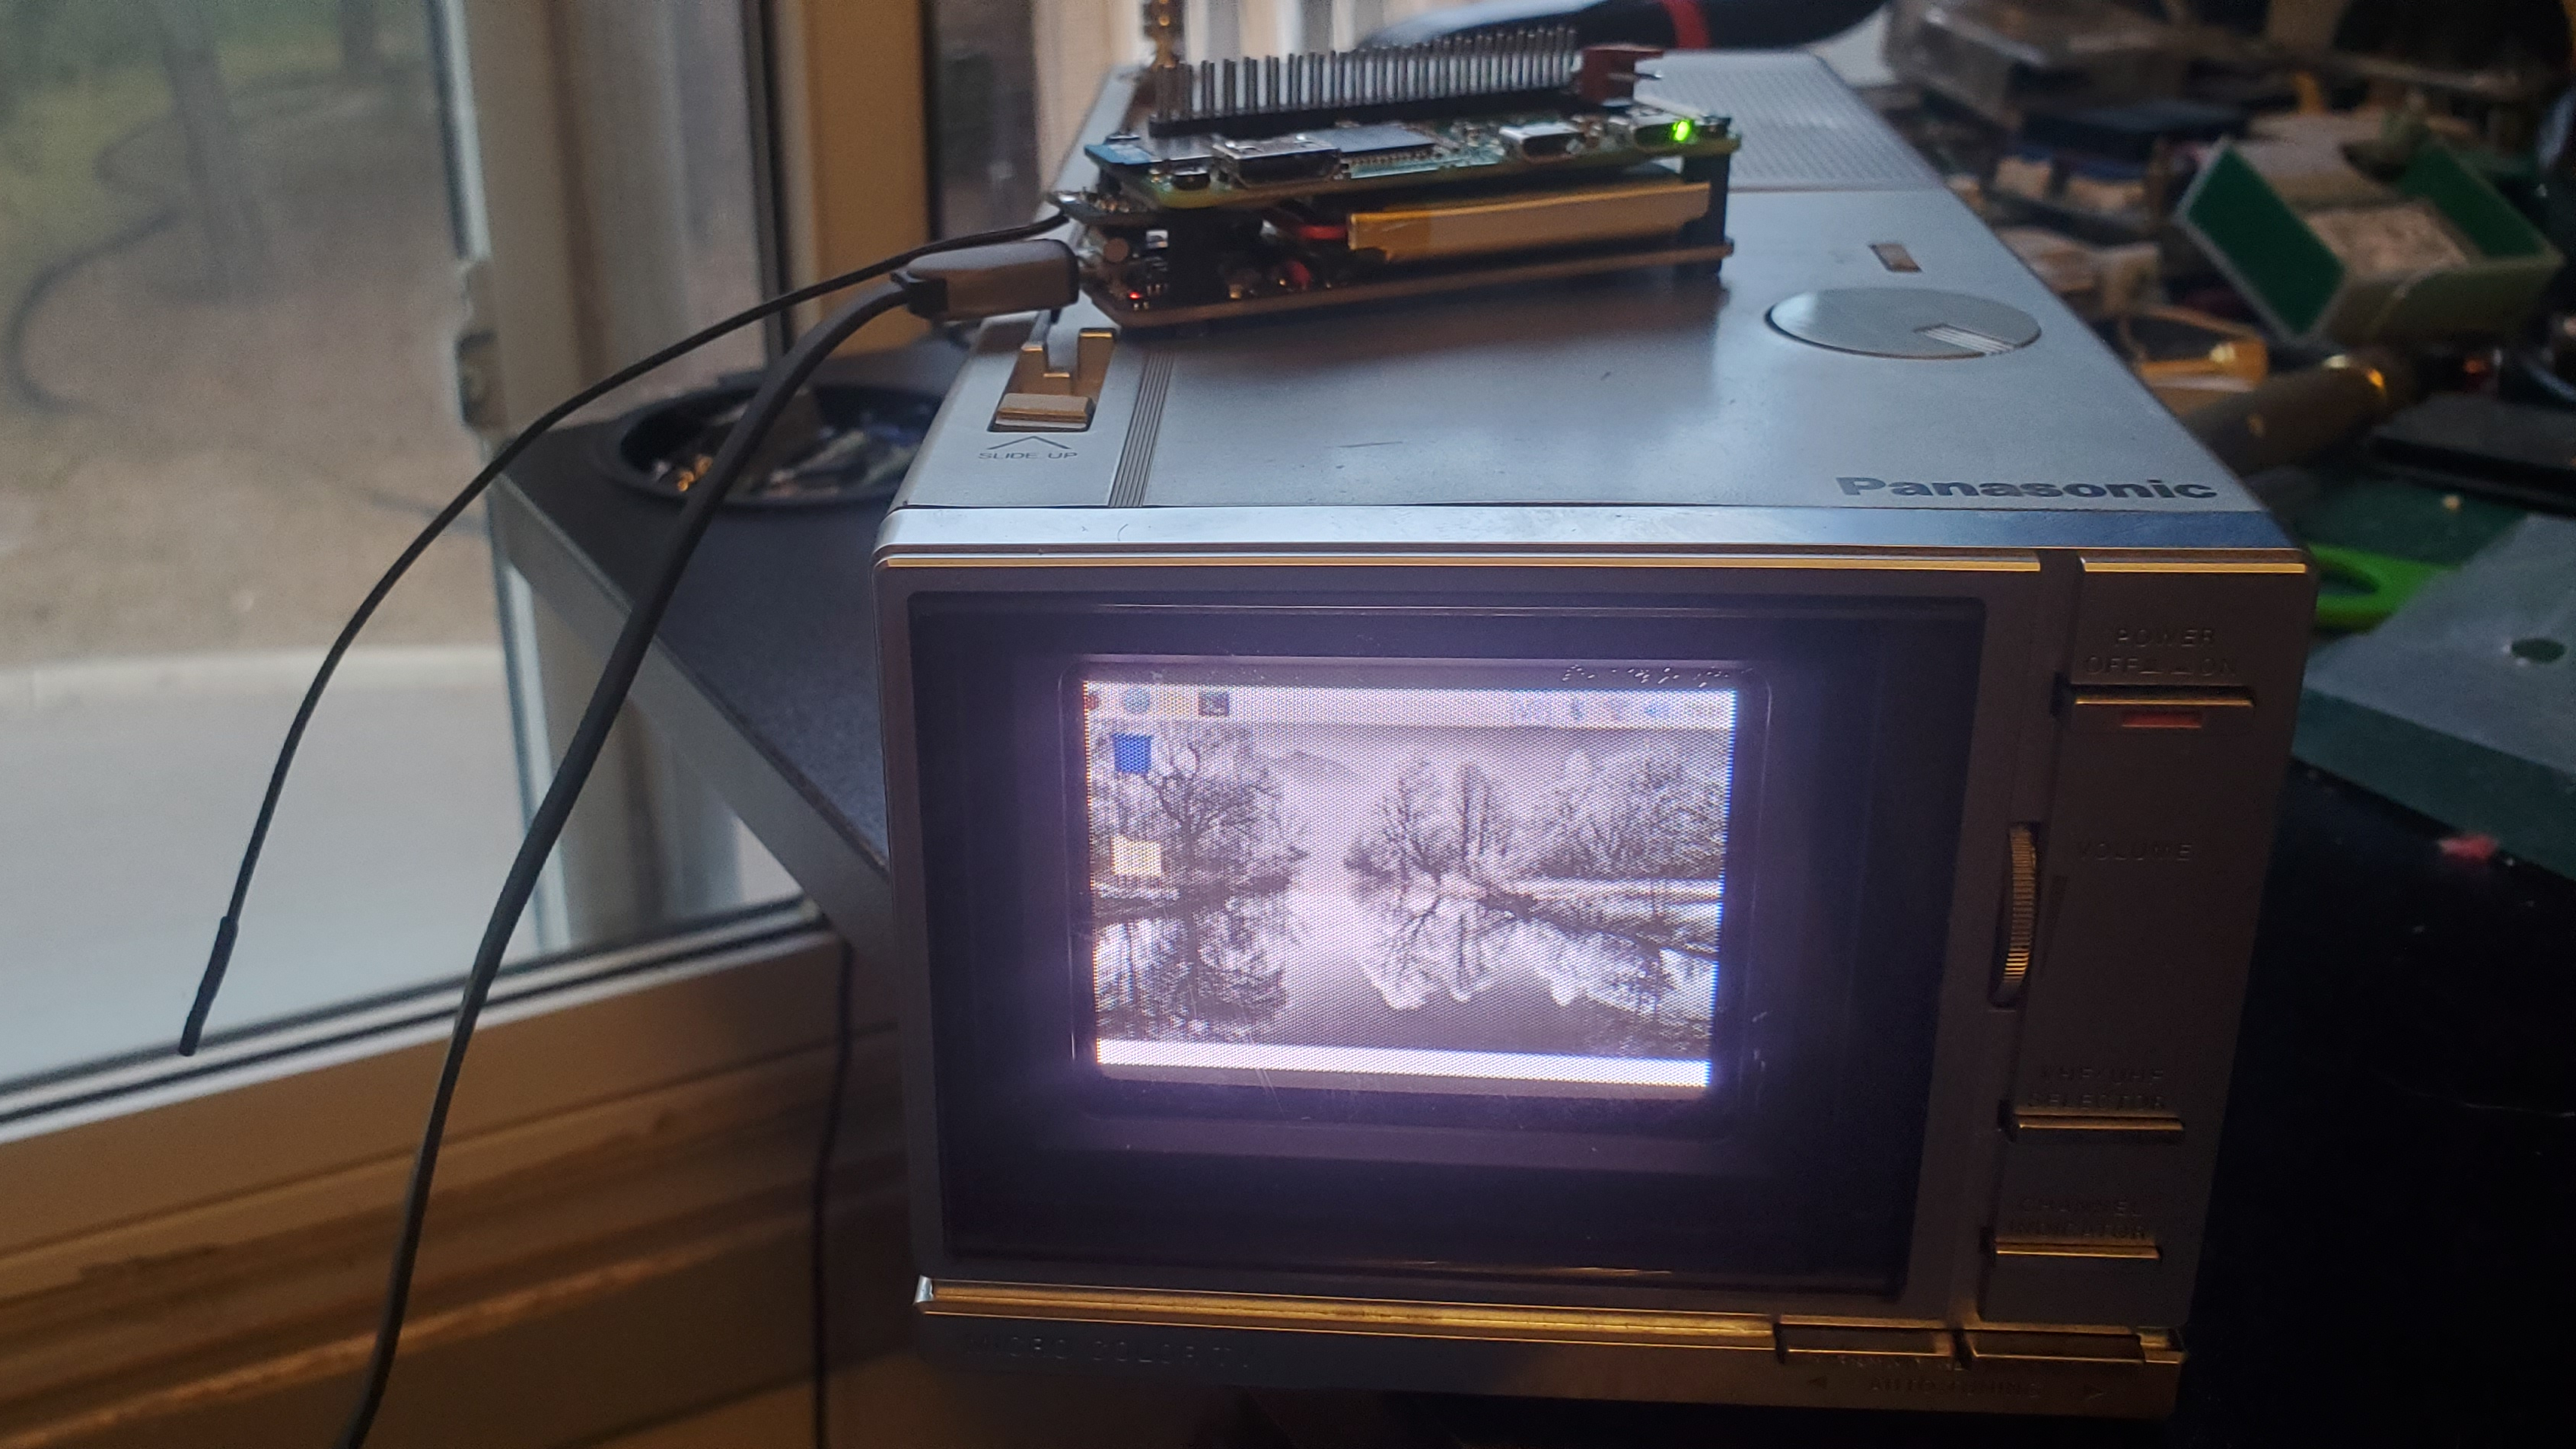 Raspberry Pi Broadcasts UHF Channels to CRT TVs